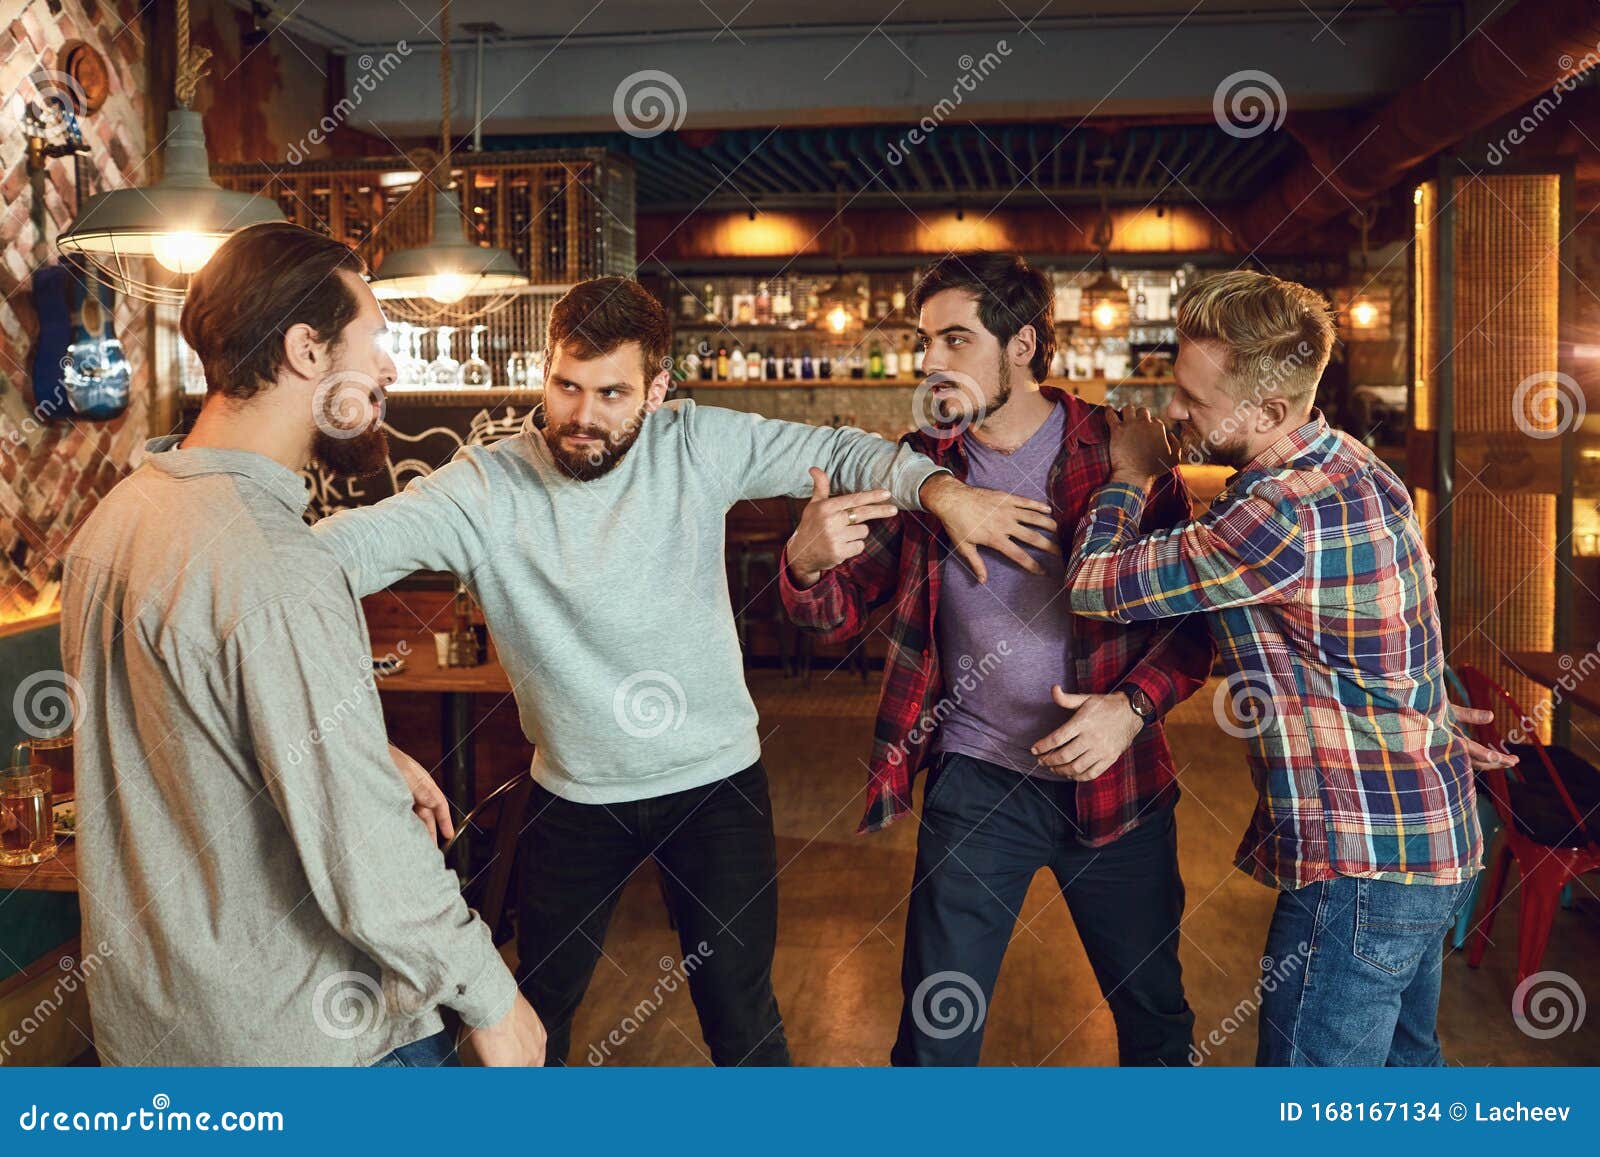 drunk people are fighting in a pub.